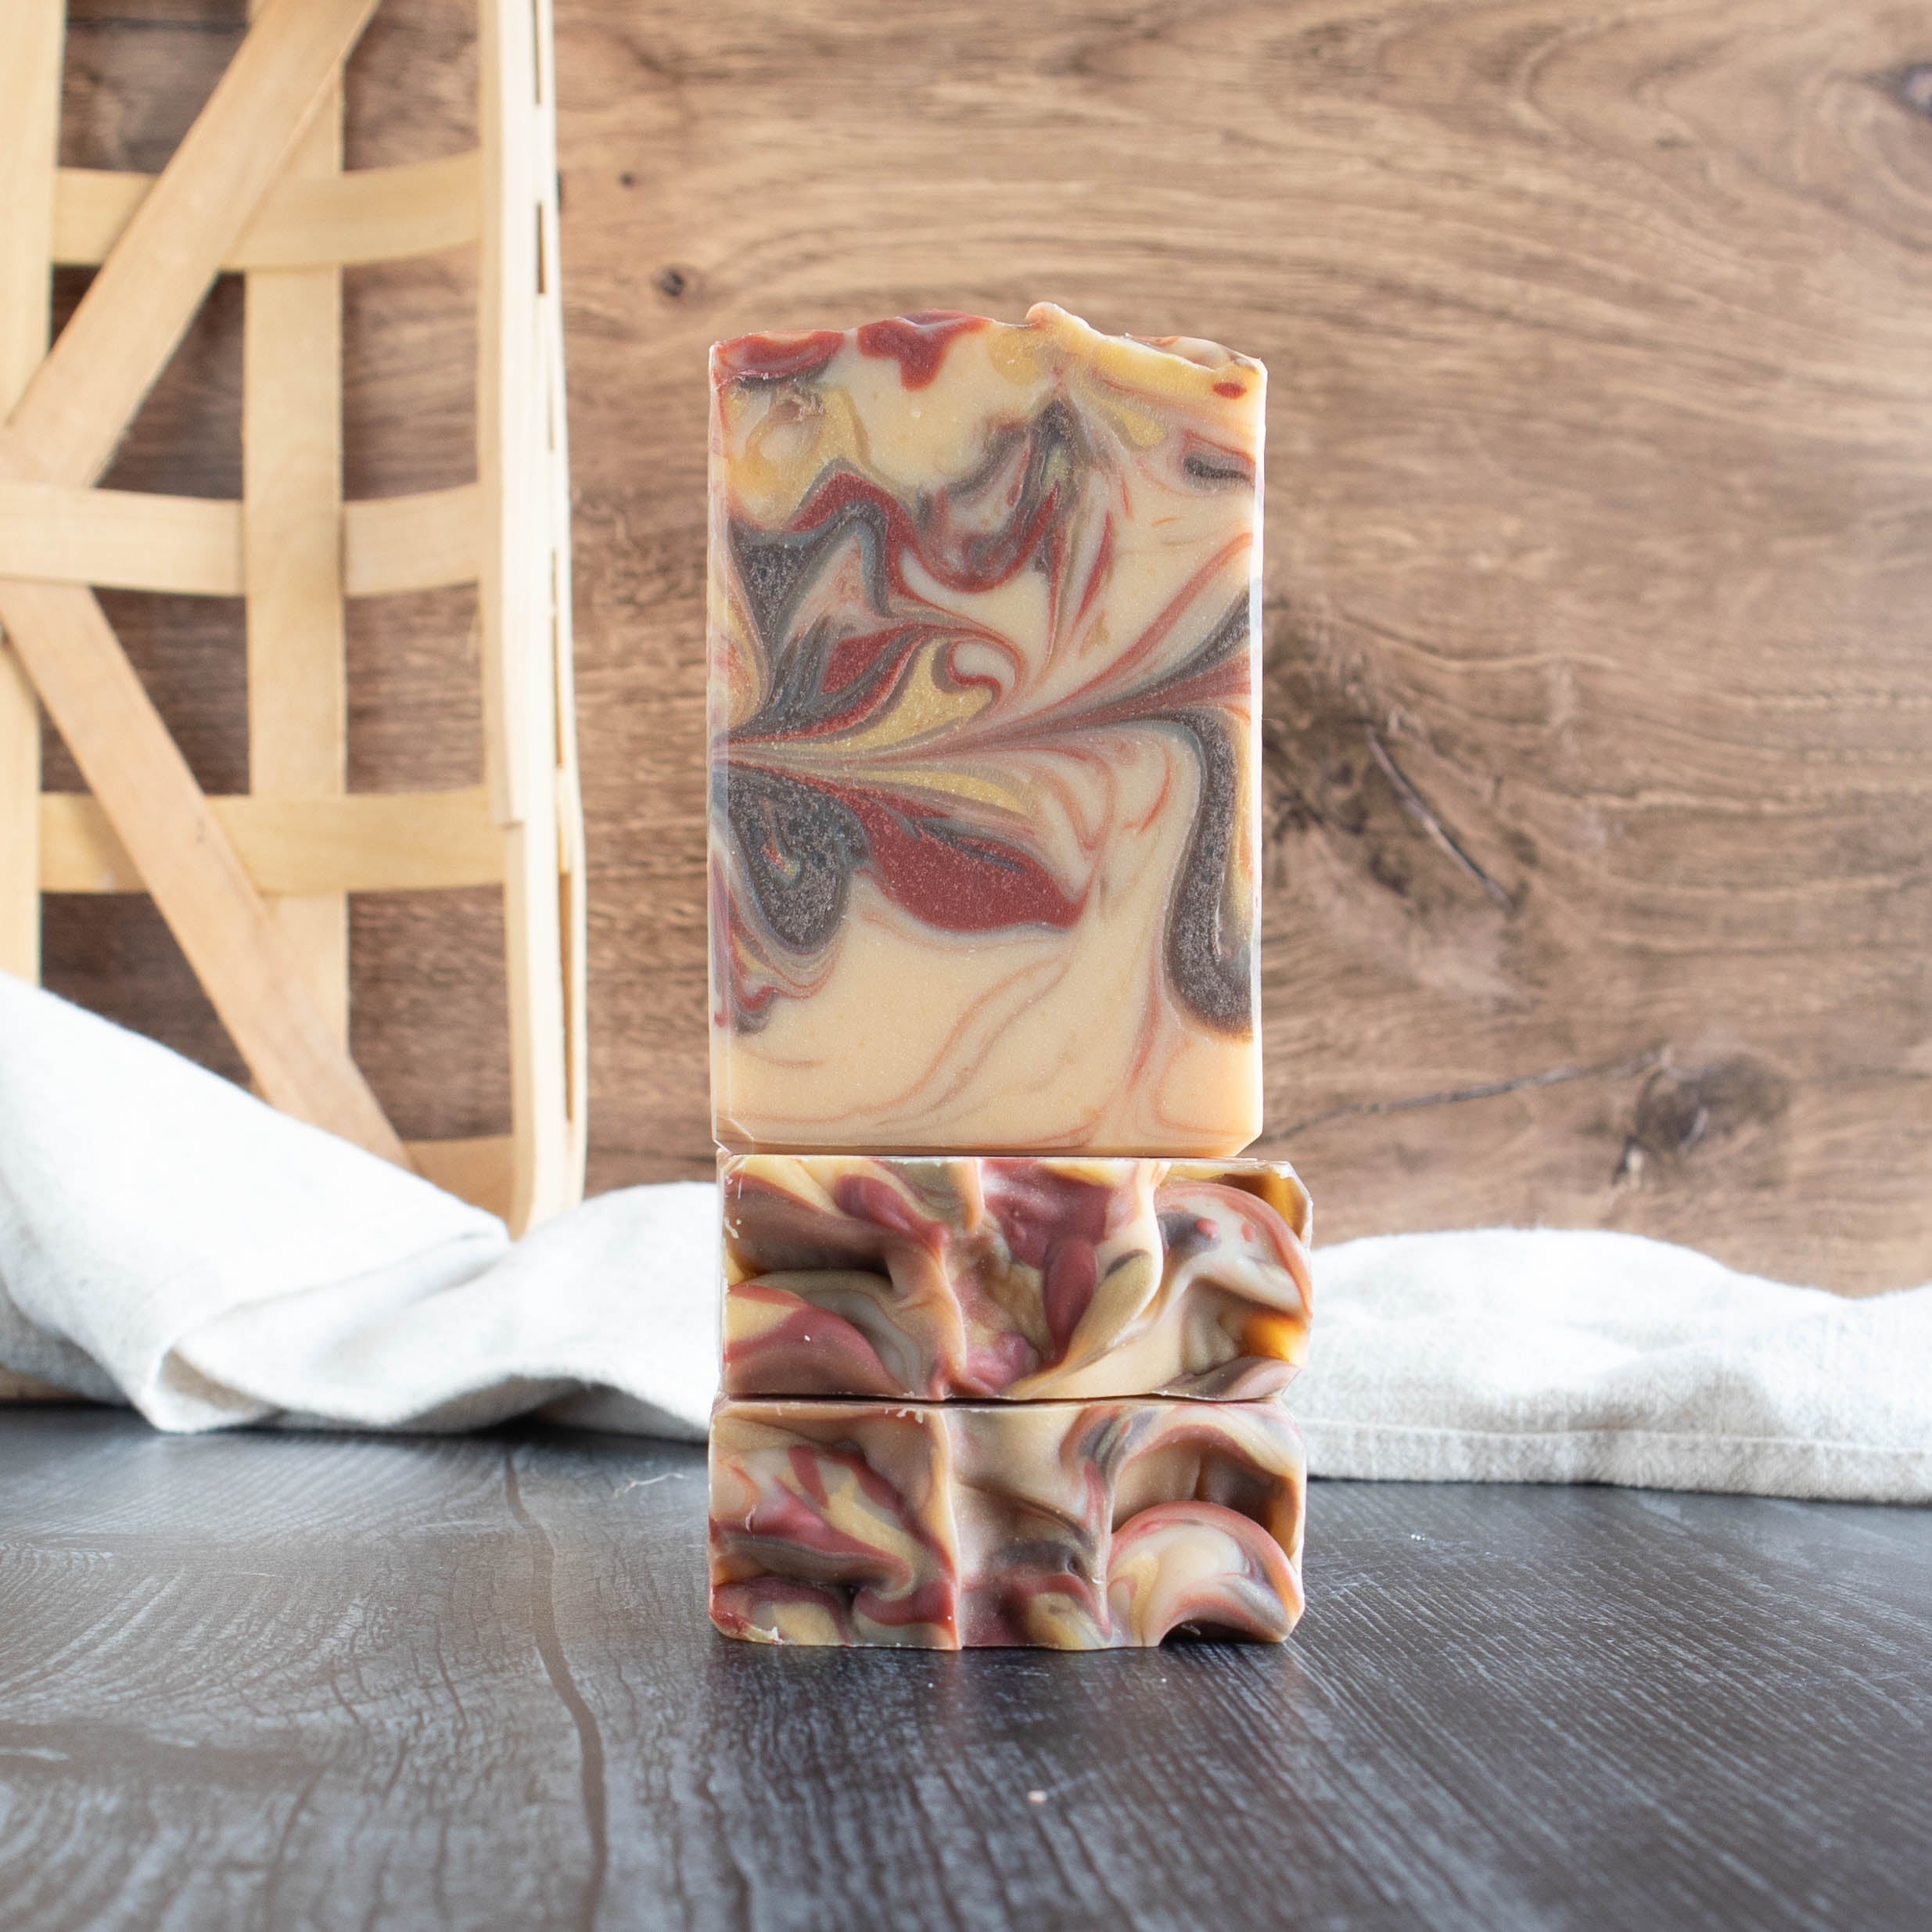 3 susnset soaps. Two are laying flat with the tops facing out and one is sitting on top of them showing the face of the soap. They have a cream base with a rust red, brown and yellow swirl. They are sitting on a black wood base with a walnut wood background. There is a creamy towel in the background as well.